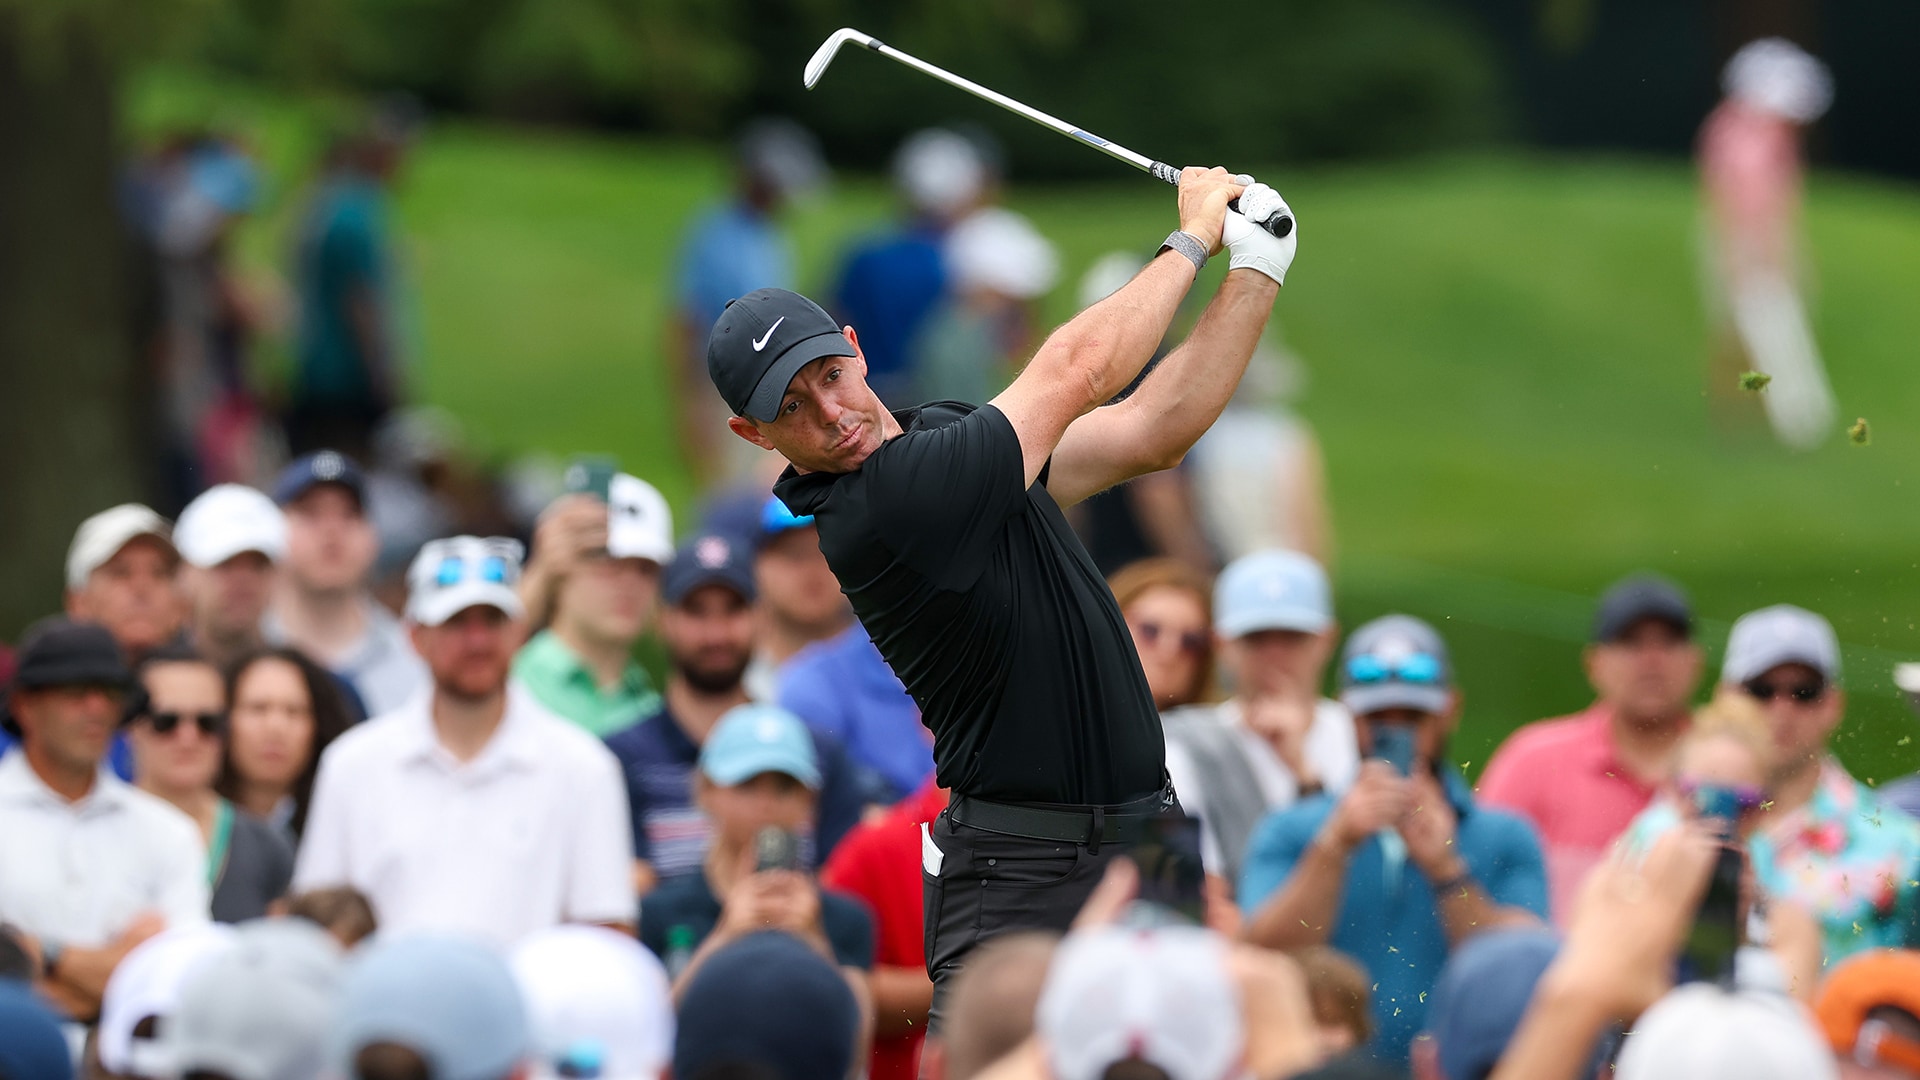 Despite scoring 4 shots worse on No. 8, Rory McIlroy fires 64 at Travelers